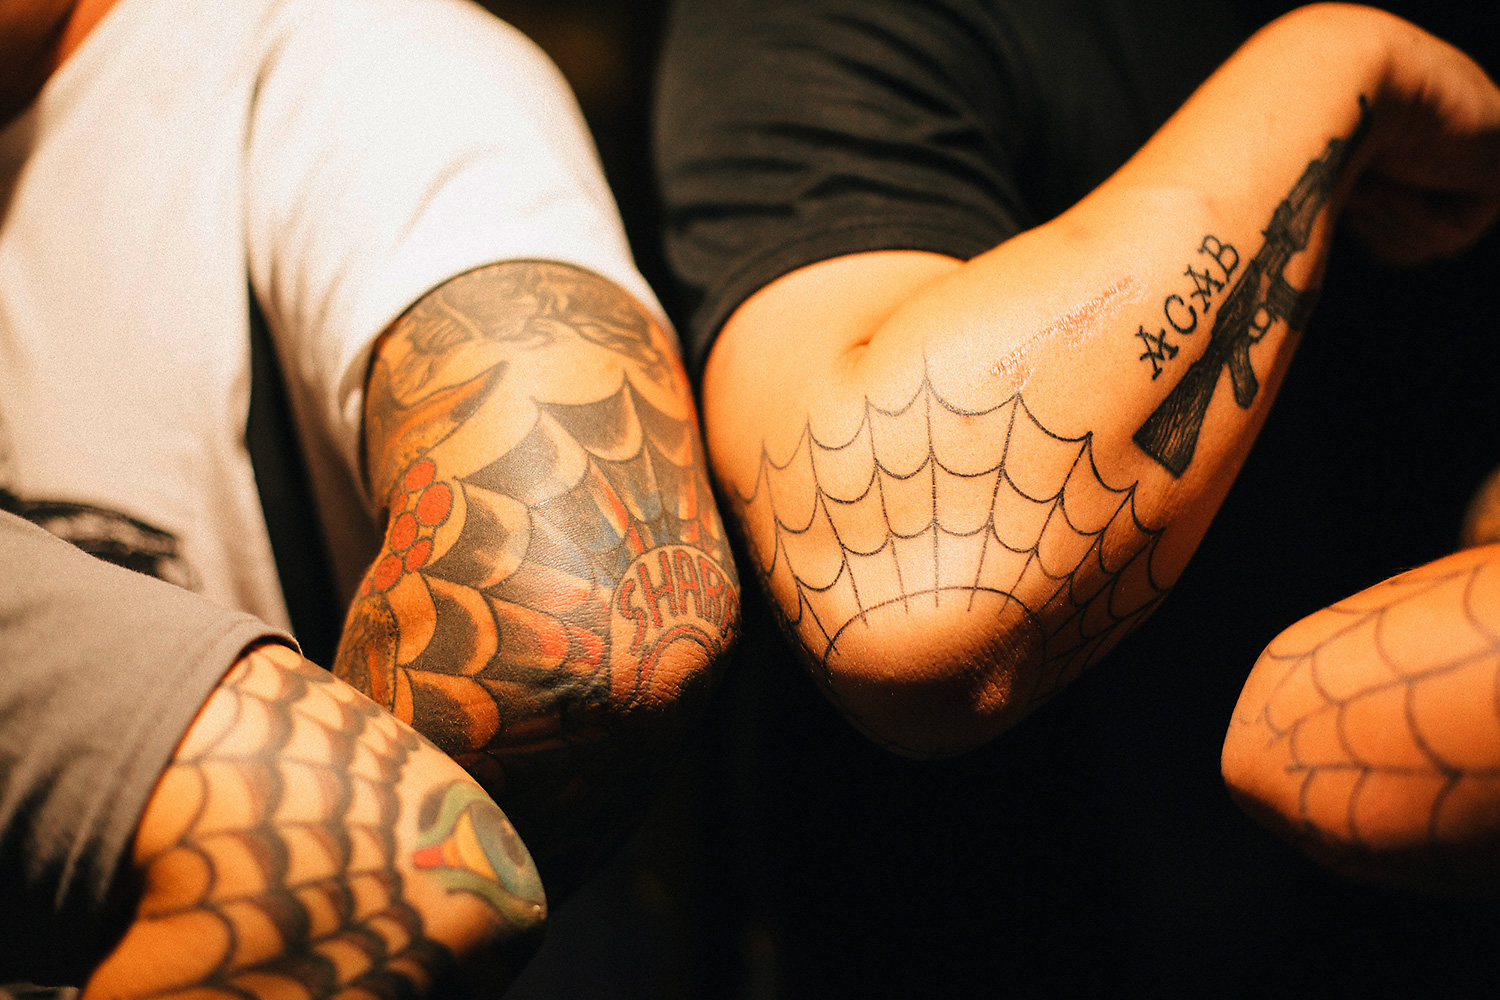 Spider webs are common prison tattoos, and as such are a symbol of resistance. According to Bangbang, a lot of people into punk will get a spider web tattoo on their elbow.